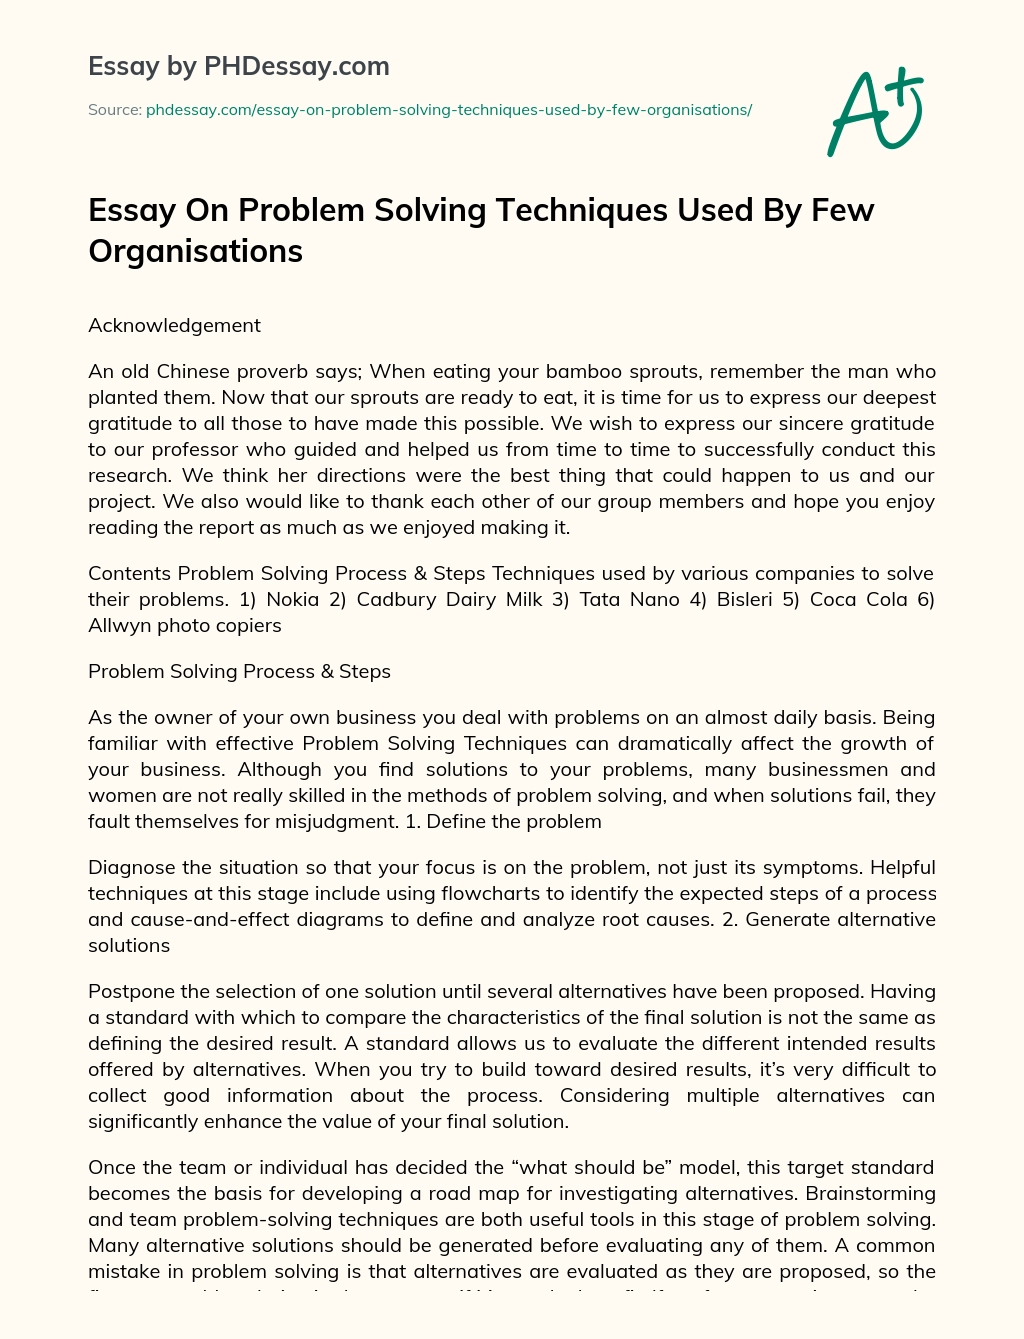 Essay On Problem Solving Techniques Used By Few Organisations essay